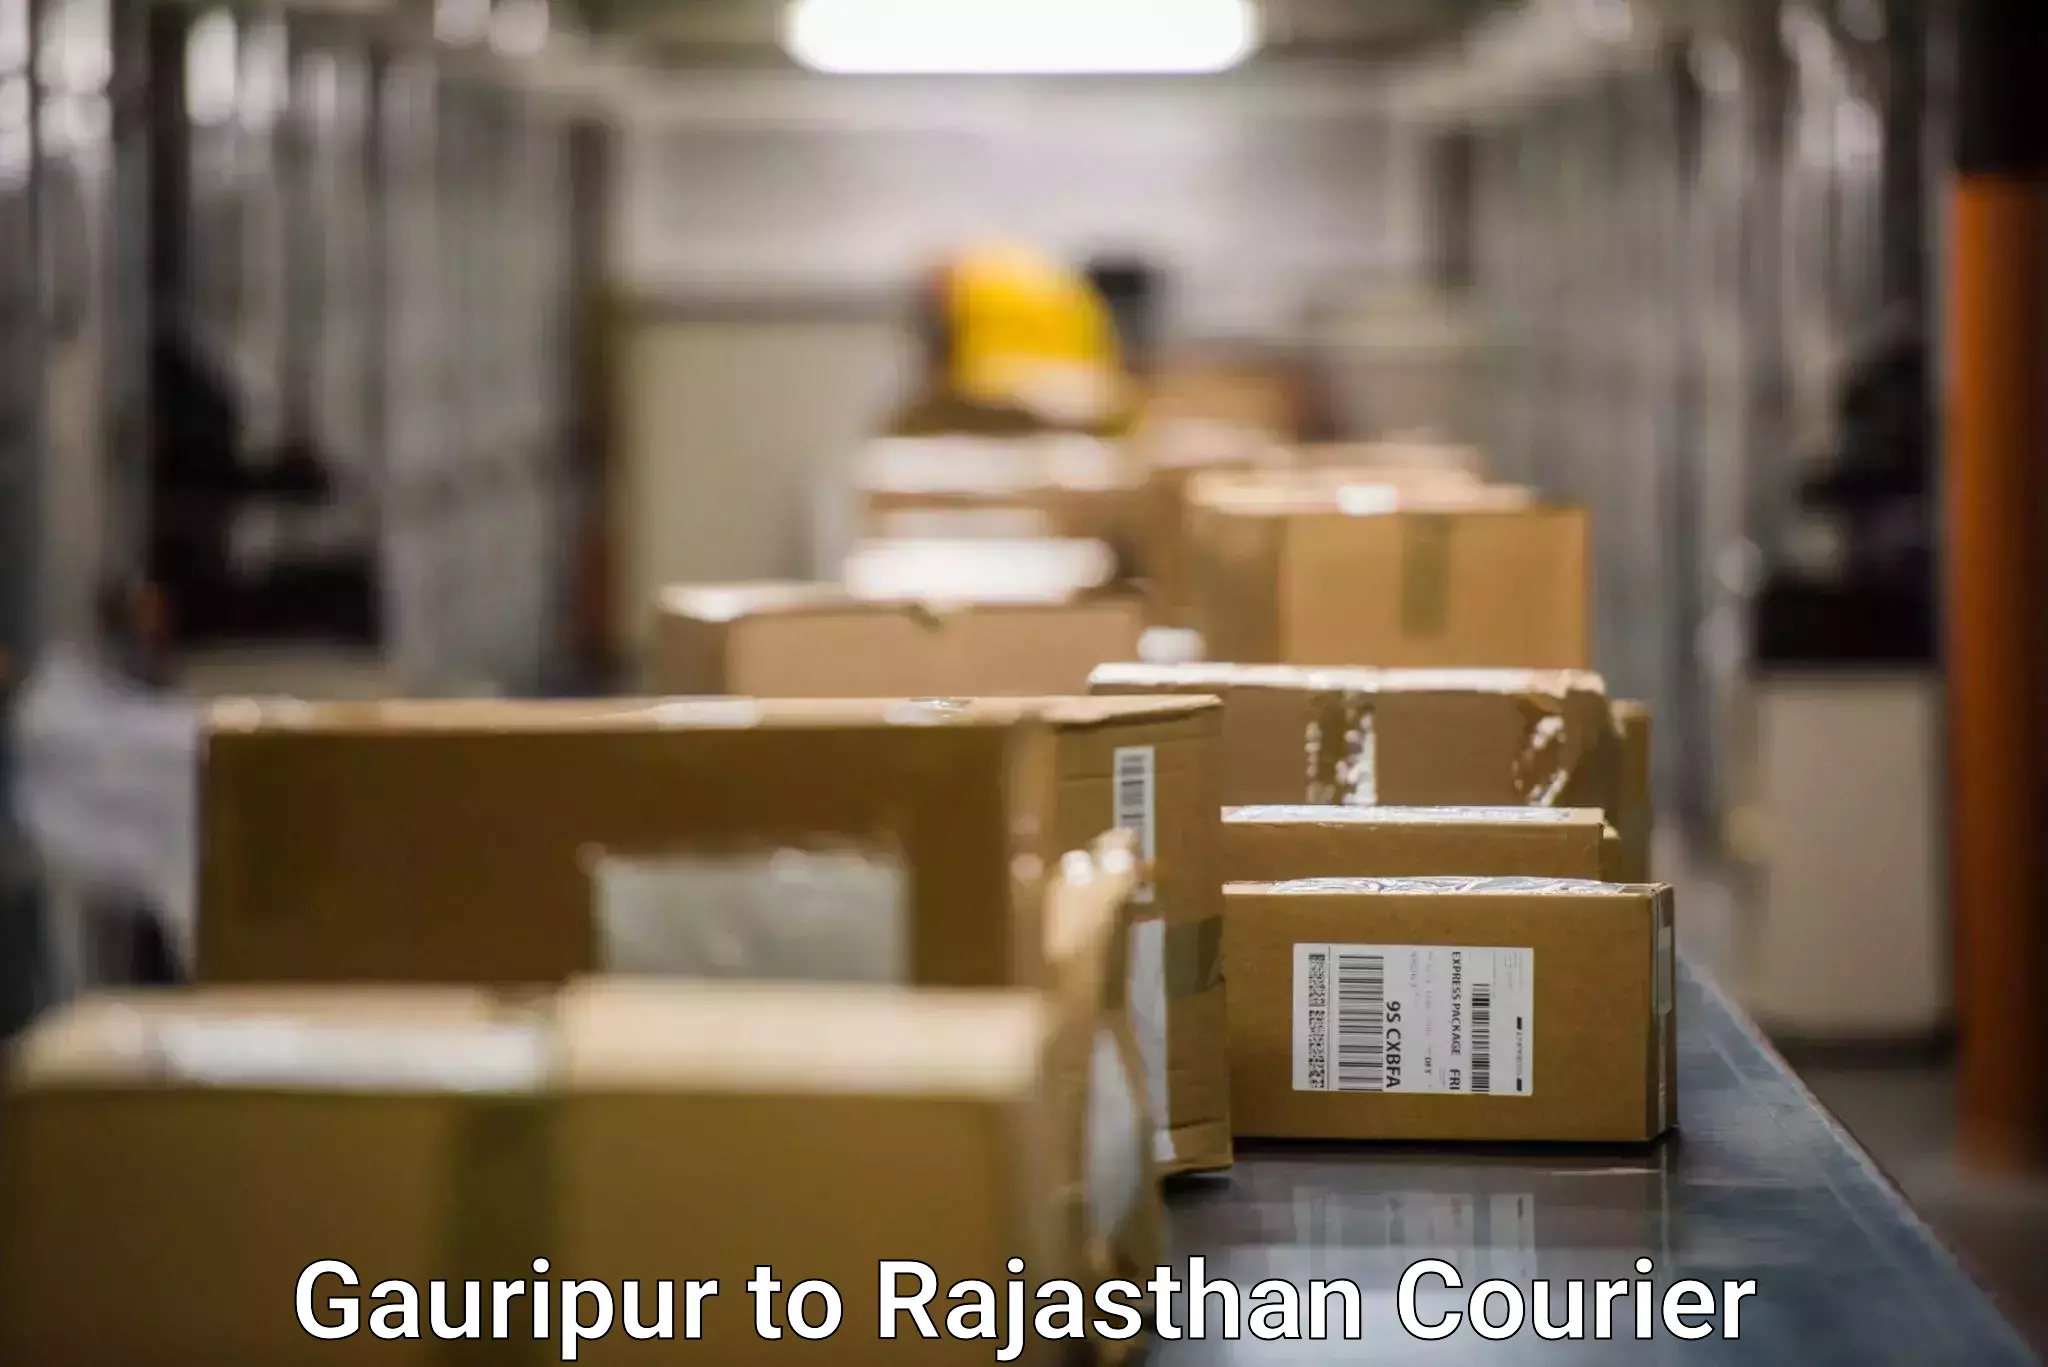 Courier service comparison Gauripur to Rajasthan